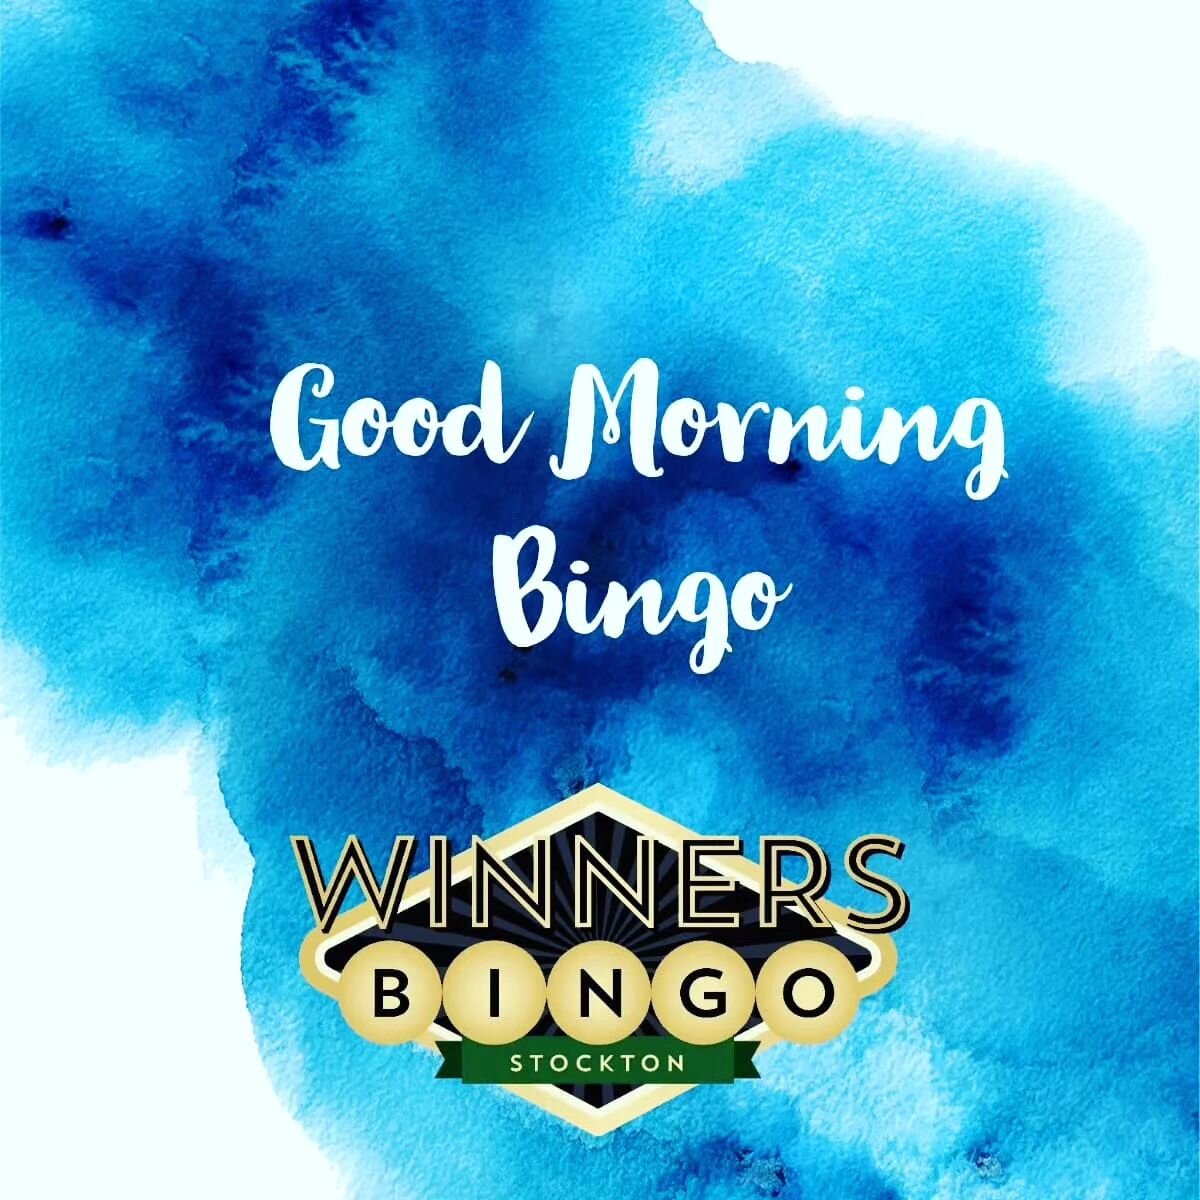 Thursday, May 18th
Day Time Session
Buy In - $30
Machine &amp; Paper
Games Payout - $500
Triple, Triple - $1,000
Powerball at $1,300
Lucky Charm - $500 or $4,200 on pink
Doors OPEN at 10:00 AM 
Games START at 12:00 PM
For more information please call